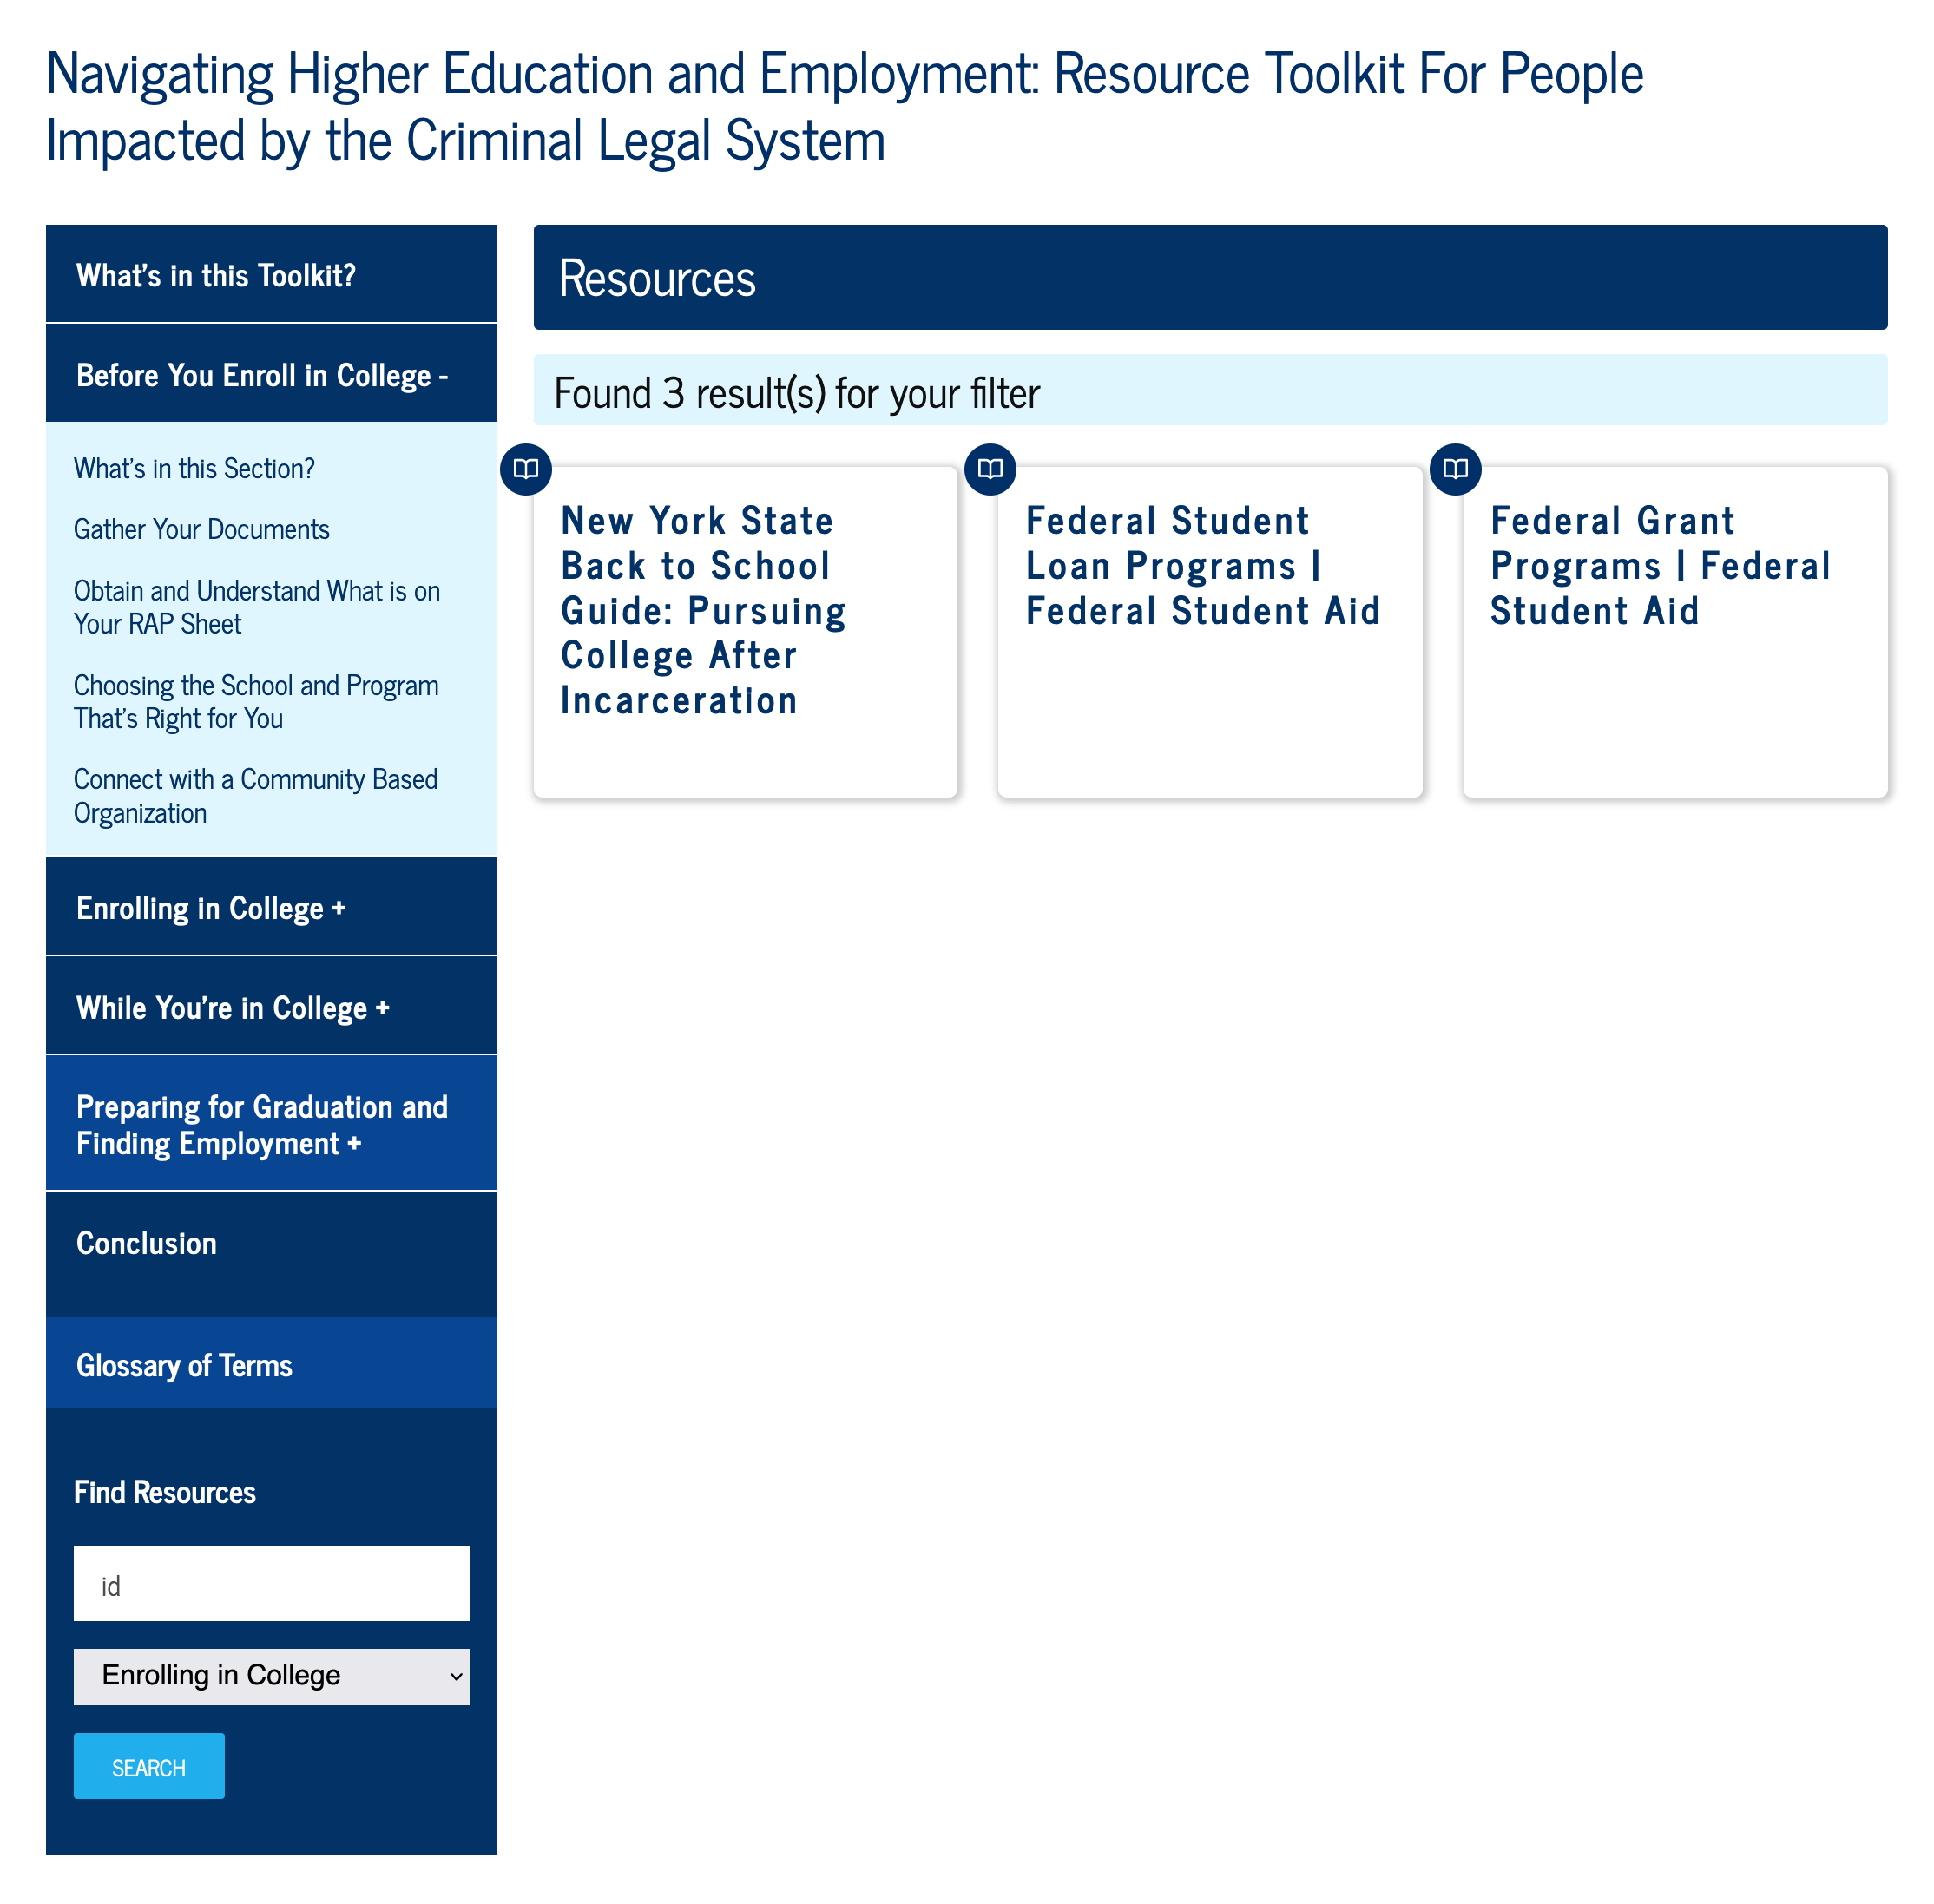 Interactive Toolkit for the Institute of Justice and Opportunity at CUNY John Jay: Justice and Opportunity Institute Toolkit: Keyword Search